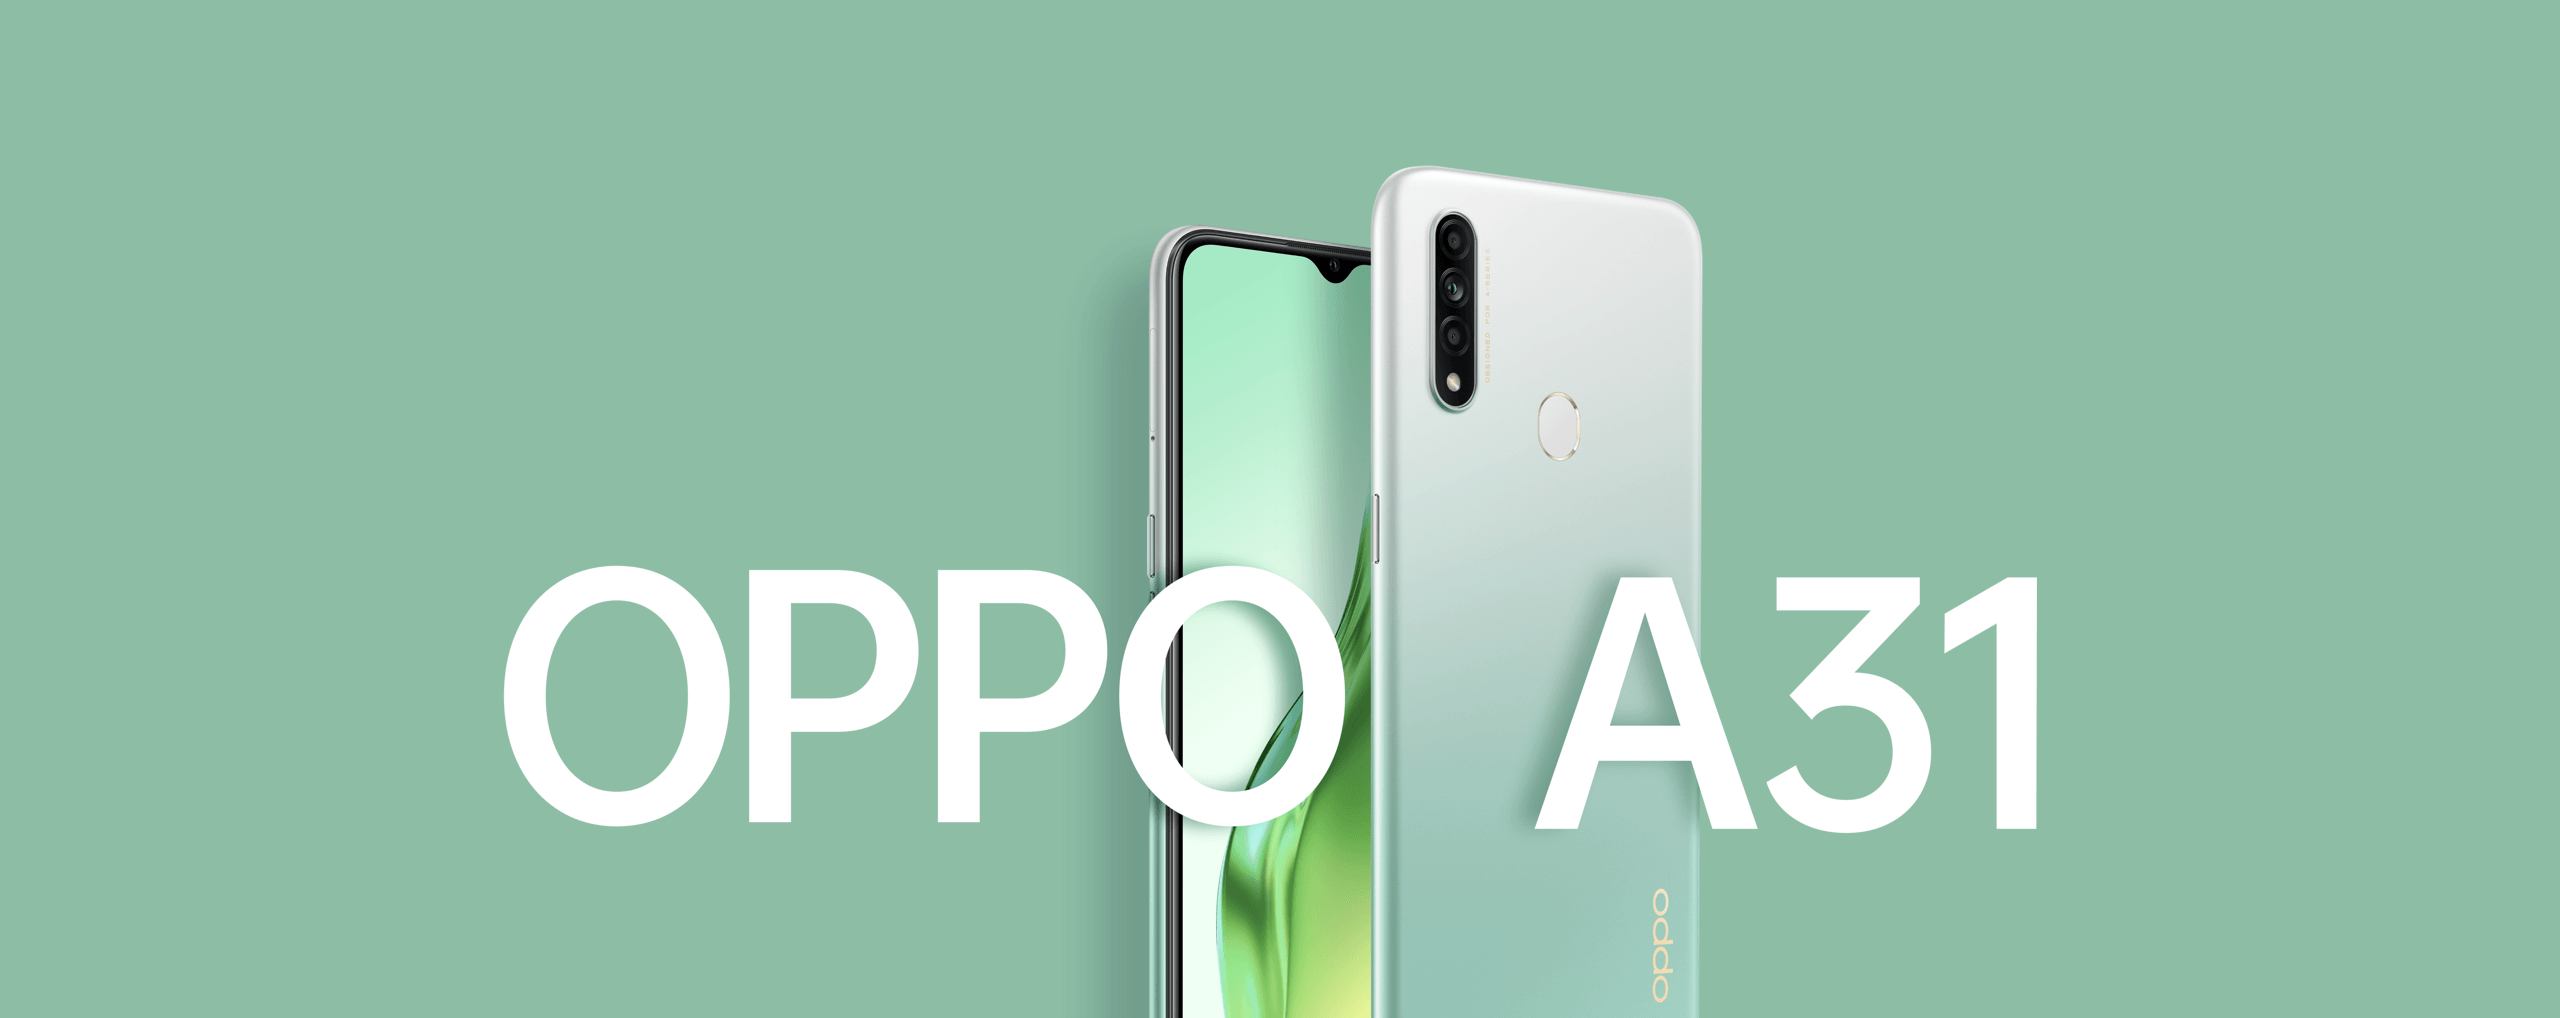 OPPO A31 price in nepal